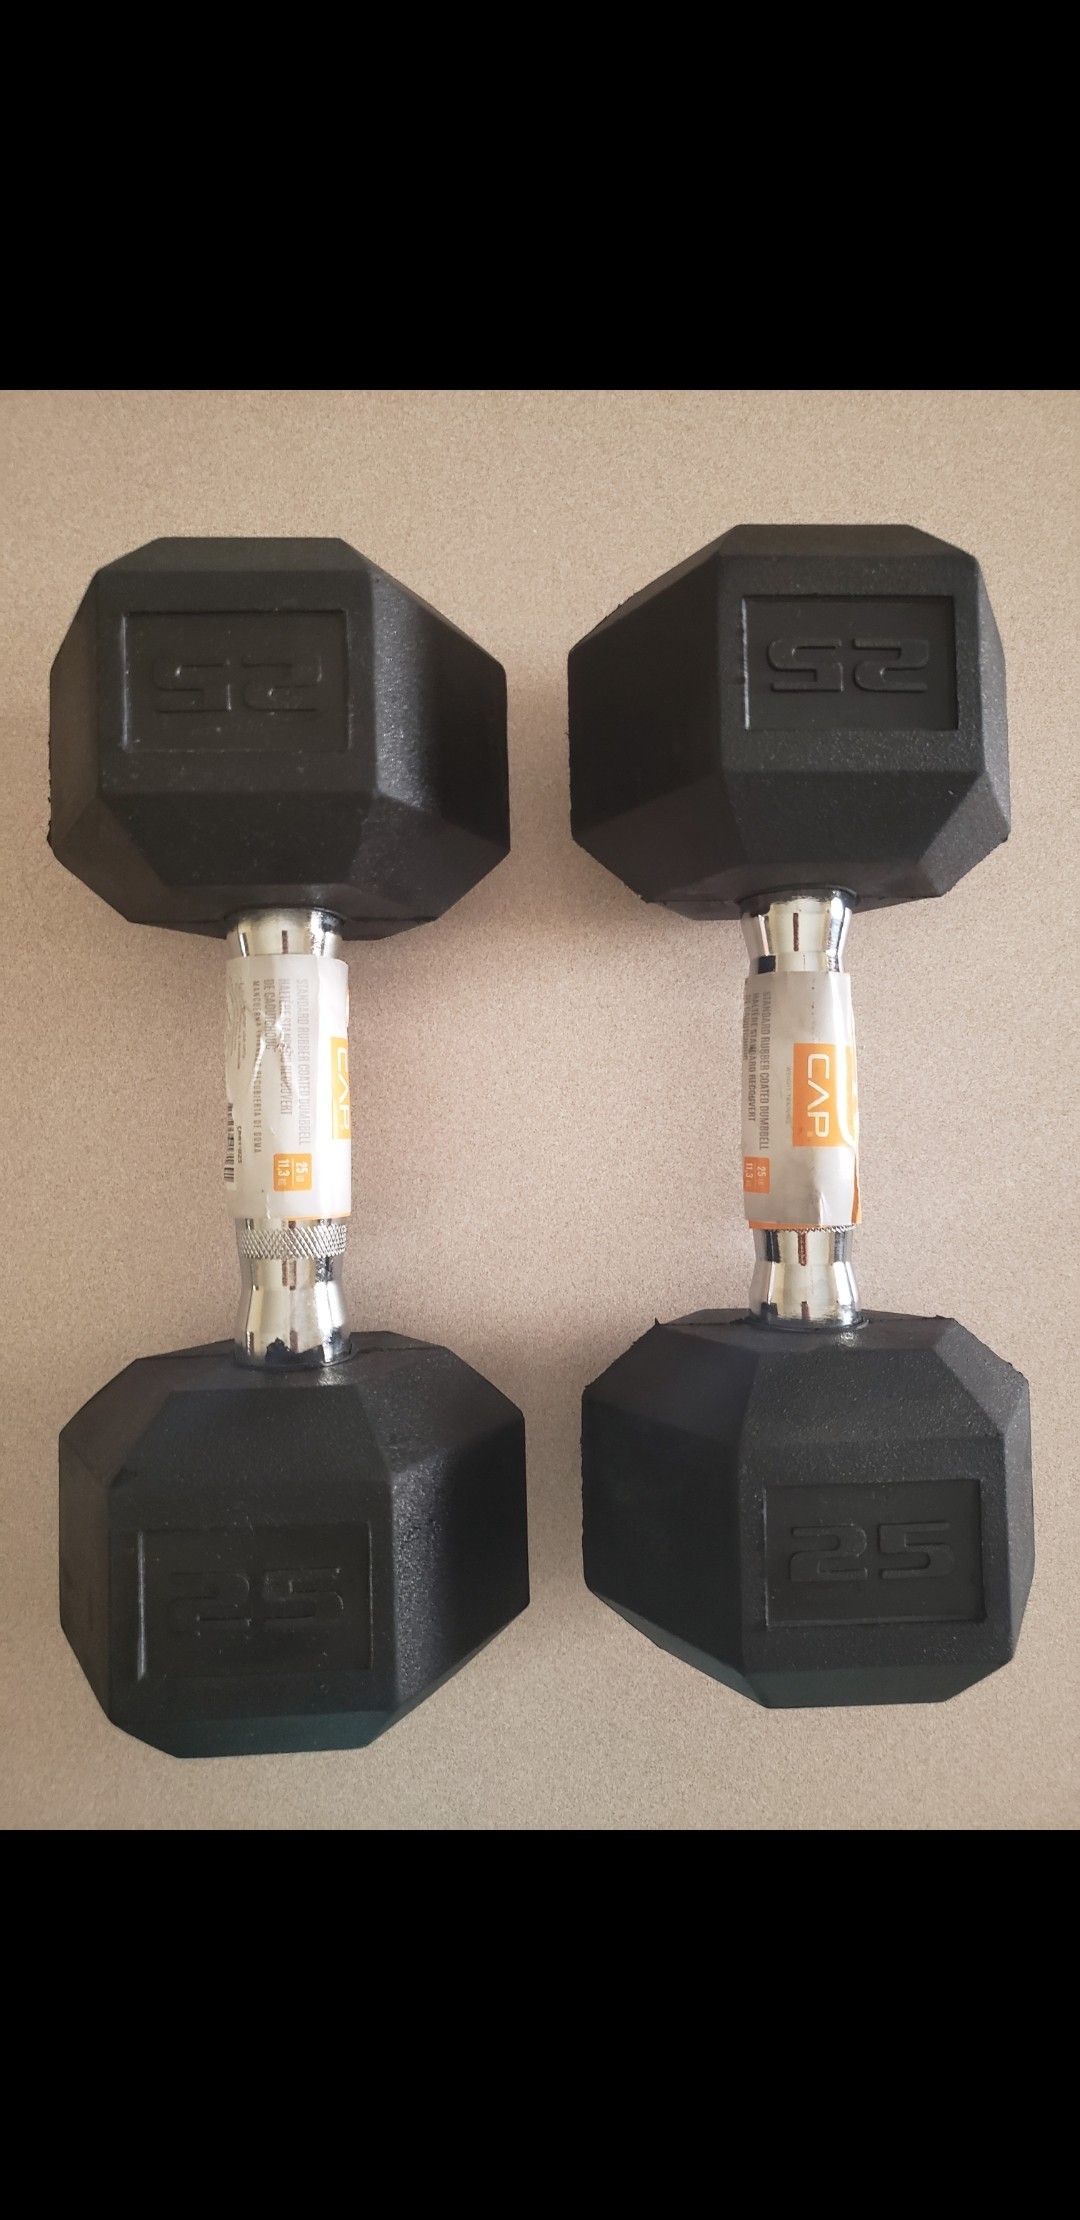 25 lb Dumbbell Weights - New Pair